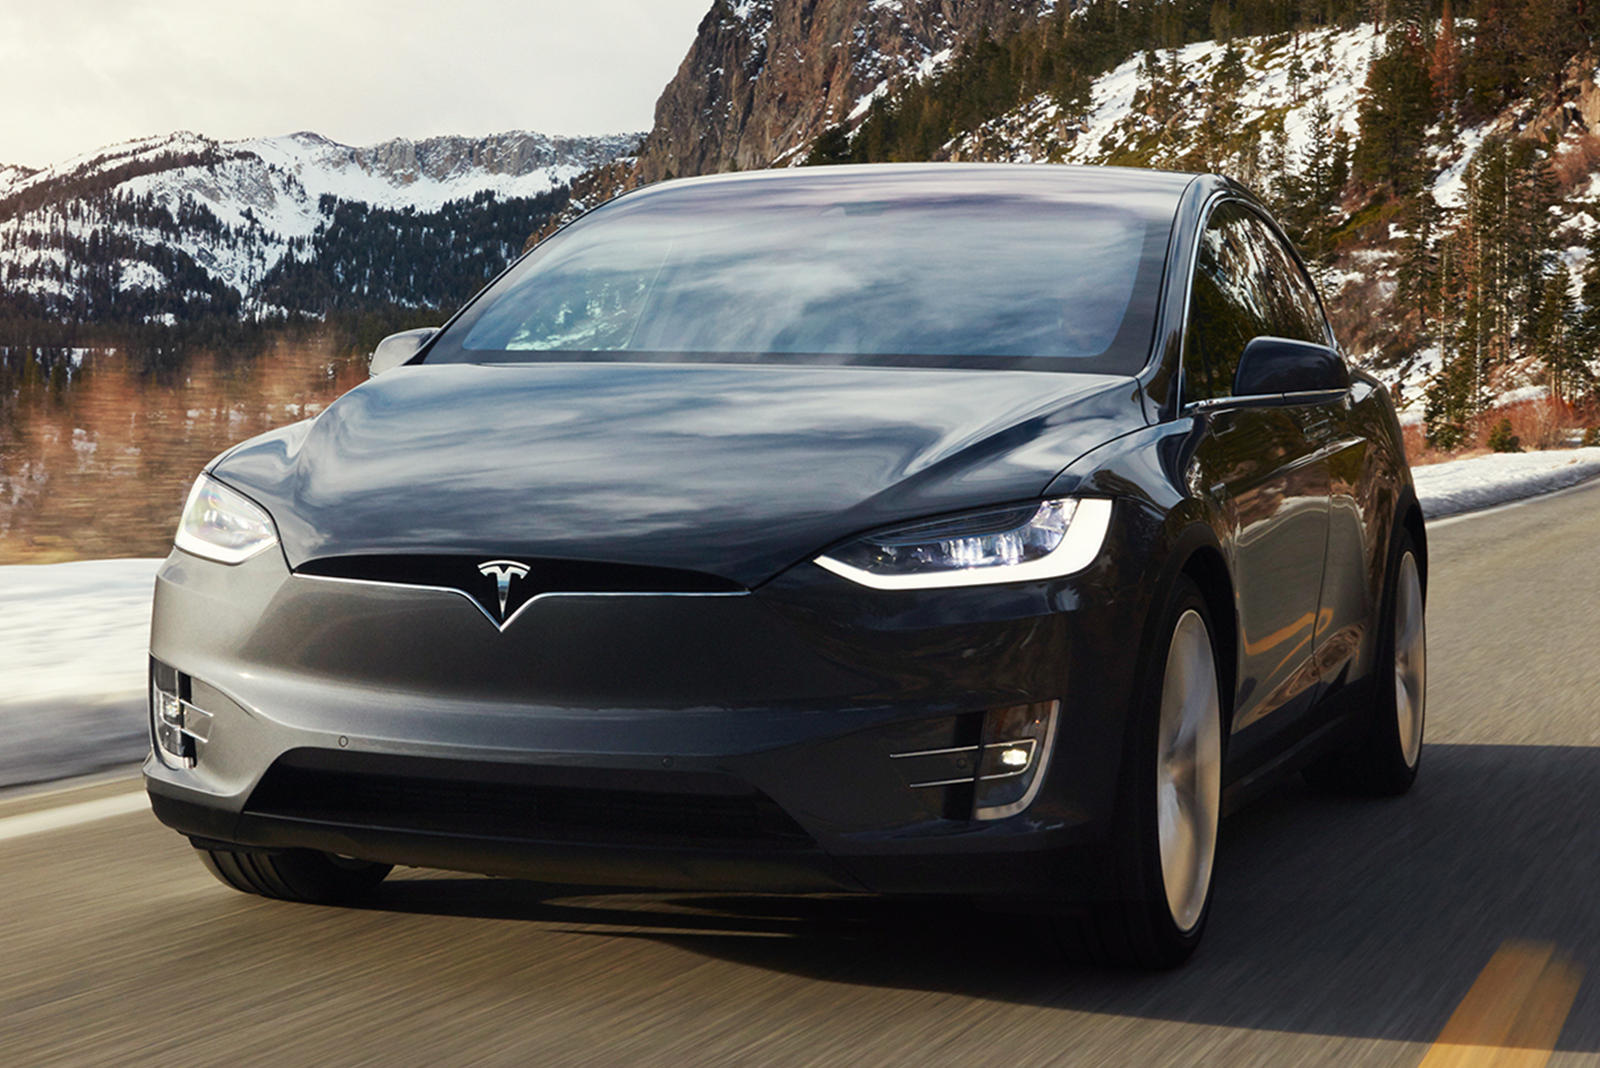 in-the-market-for-a-used-tesla-read-this-first-carbuzz